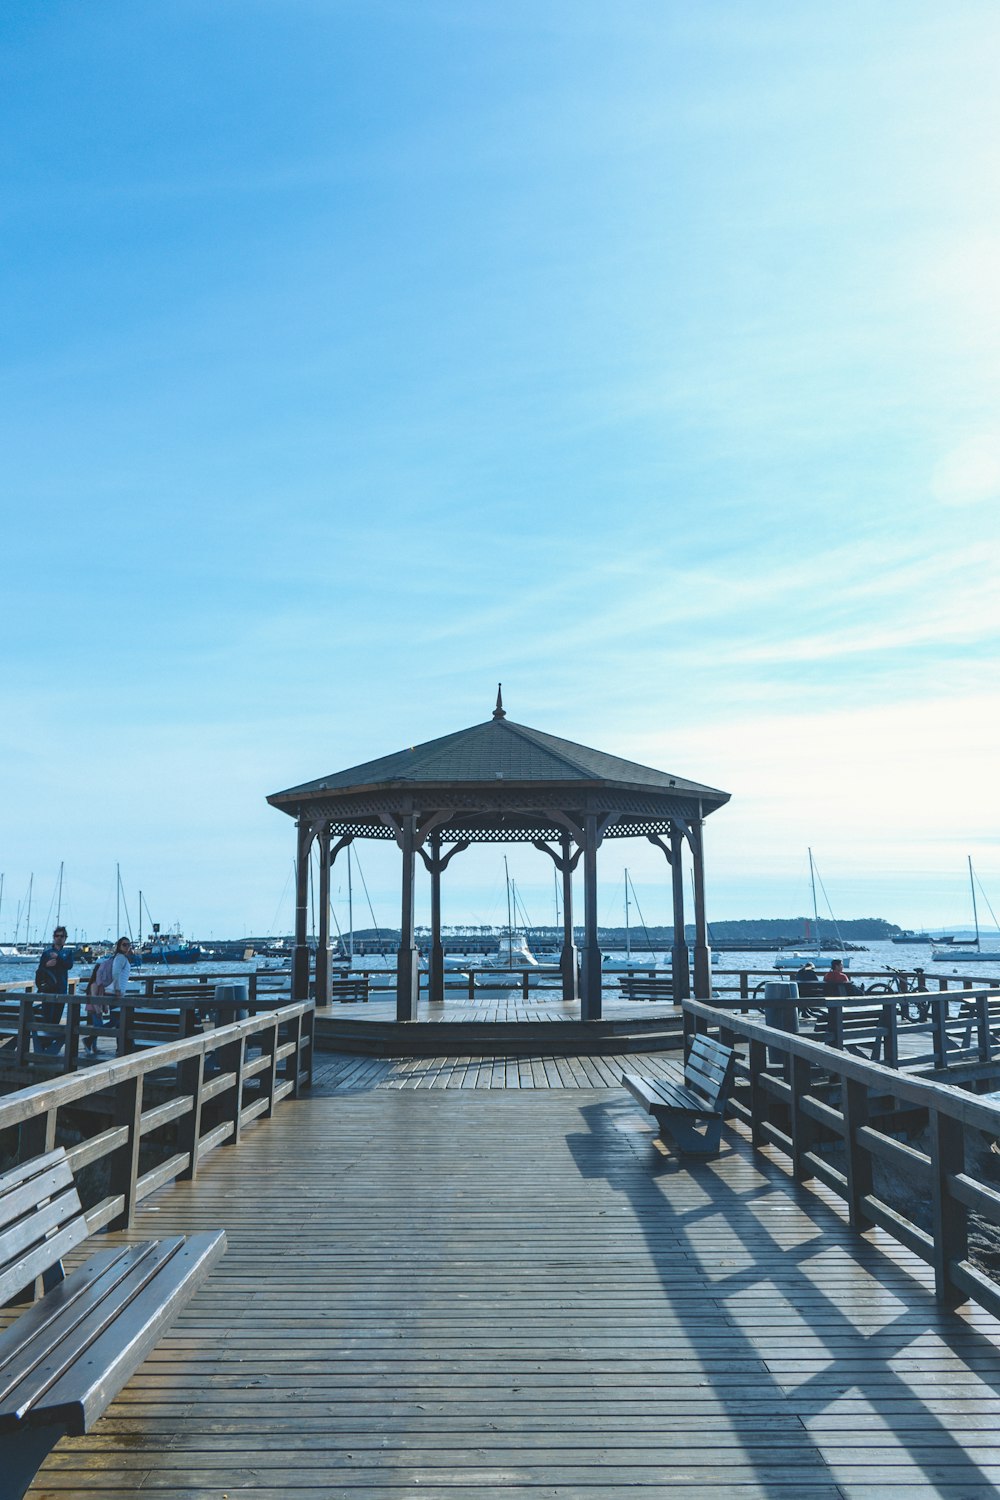 a wooden pier with benches and a gazebo